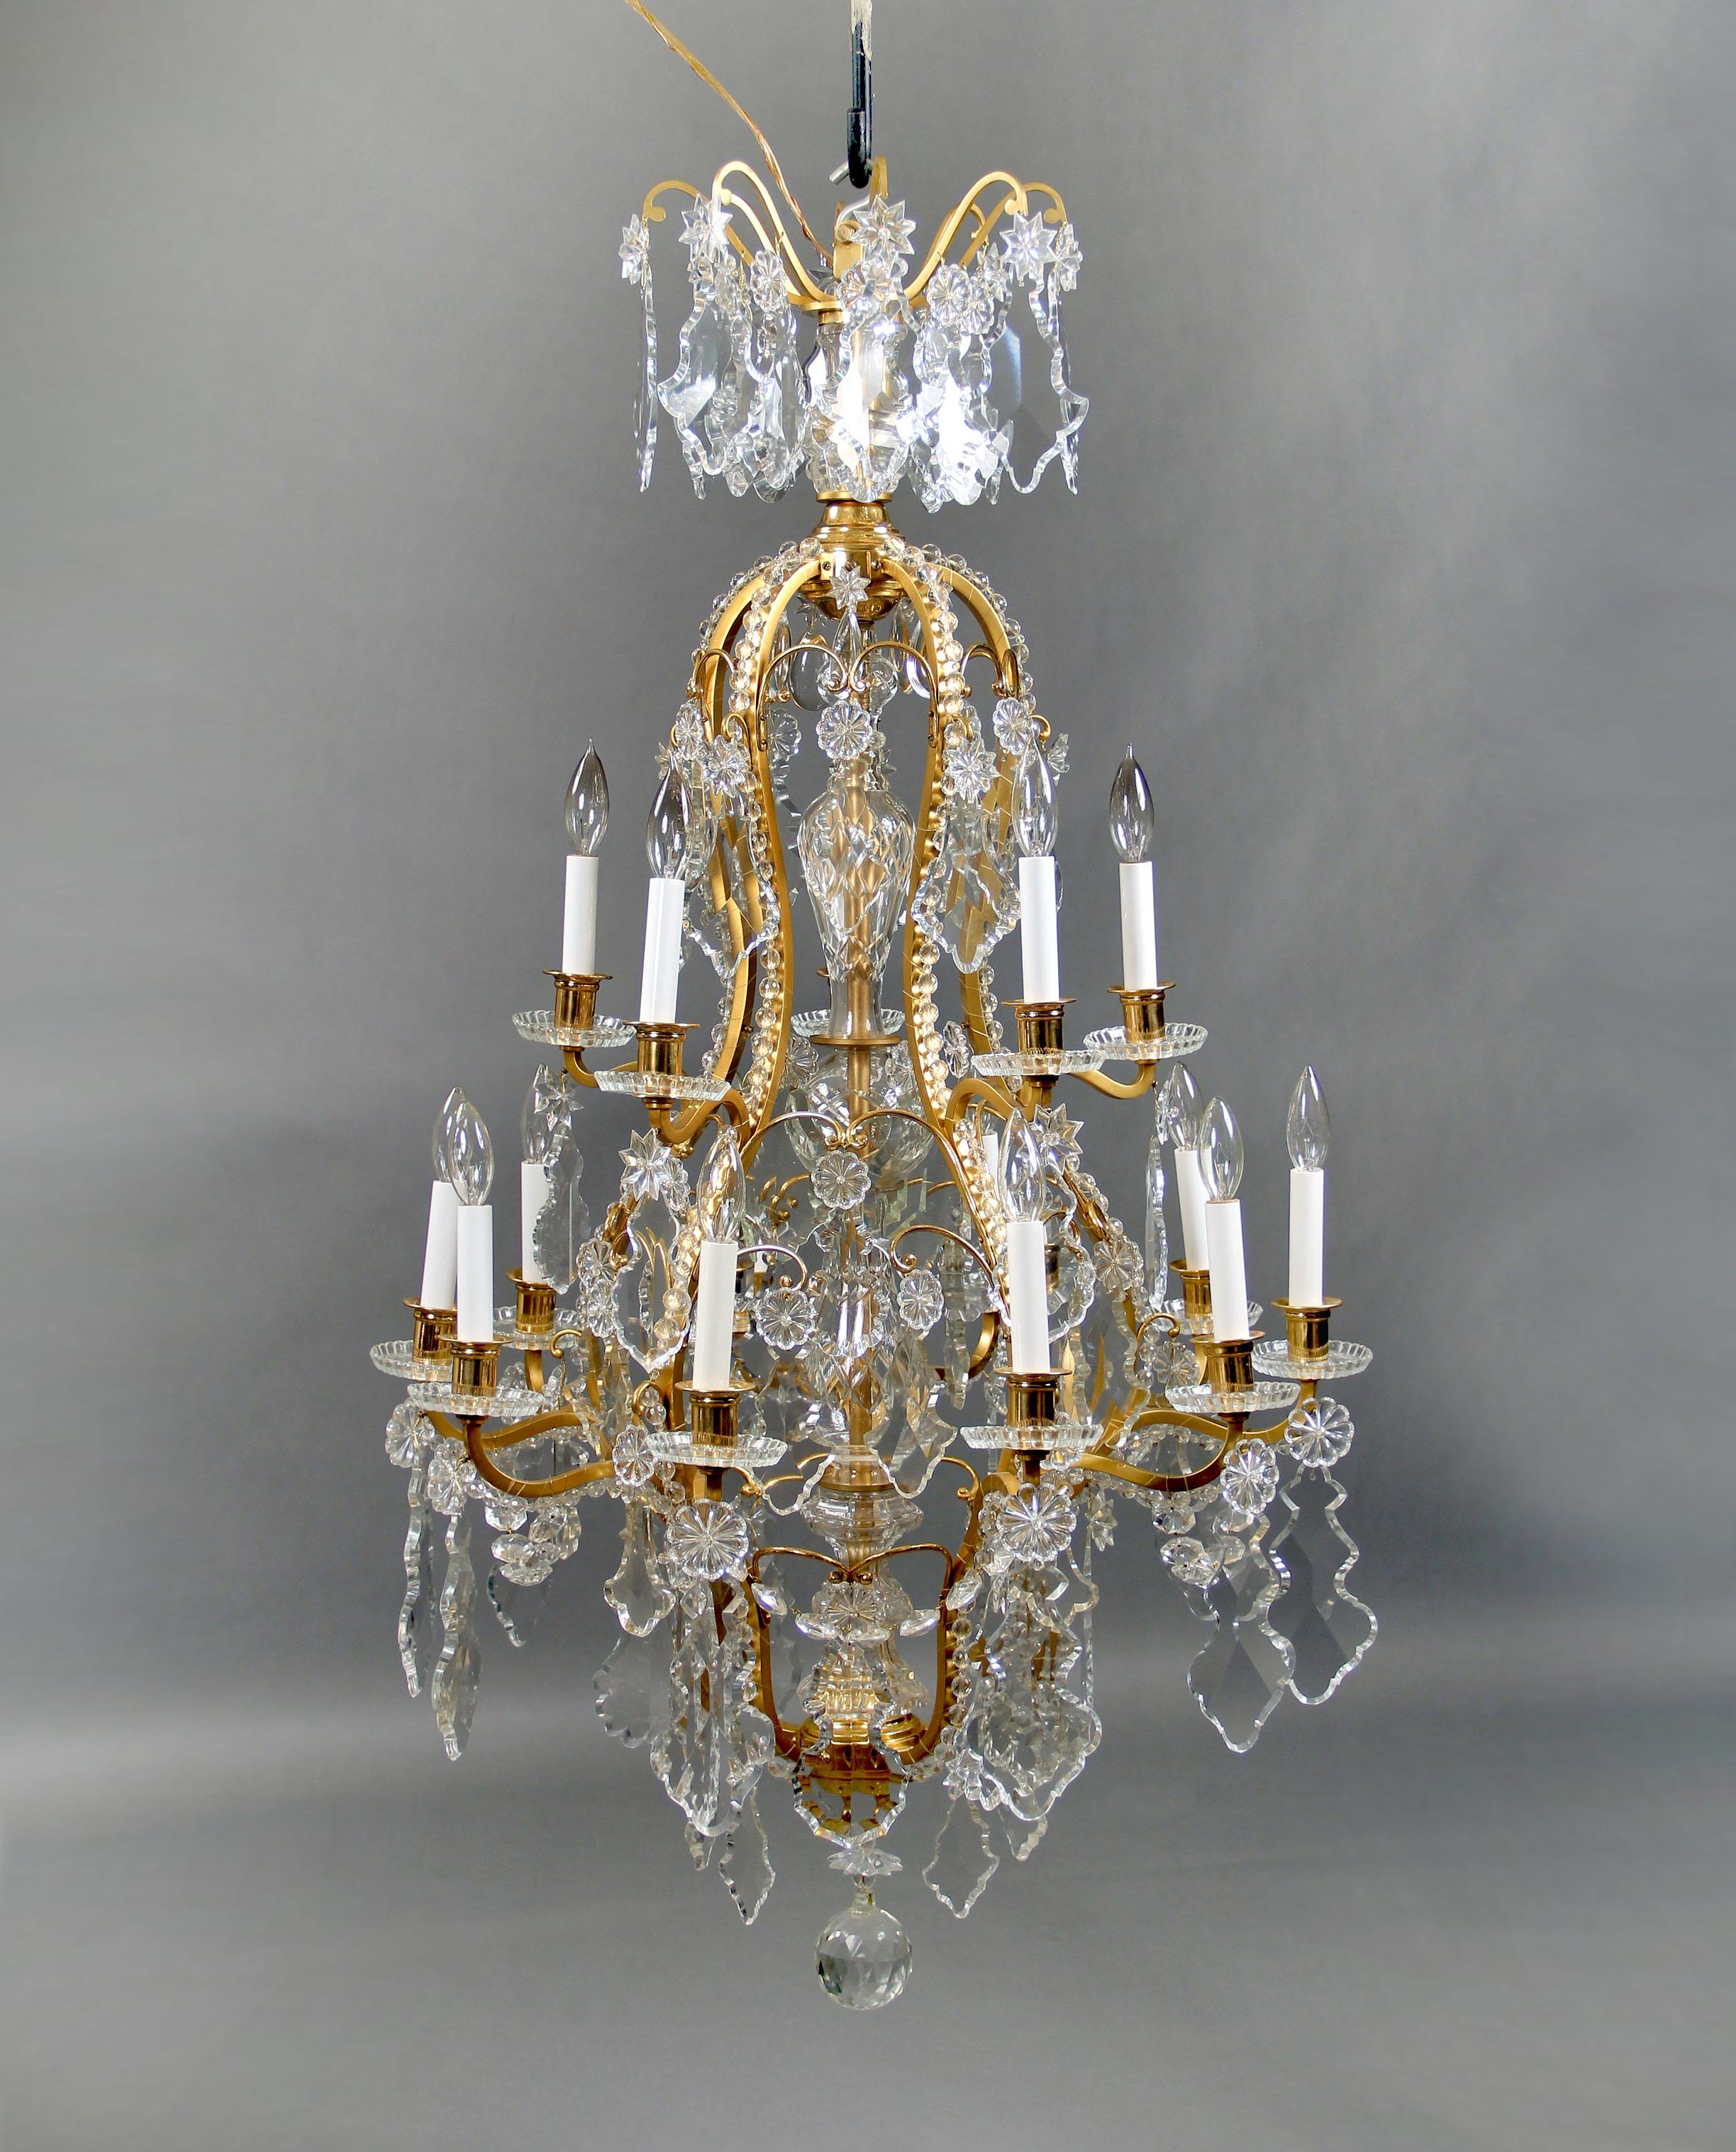 A stunning late 19th century gilt bronze and Baccarat crystal fifteen-light chandelier

Multi-faceted and shaped crystal, cut crystal central column, beaded frame. Fifteen tiered perimeter lights, bobeche cups.

